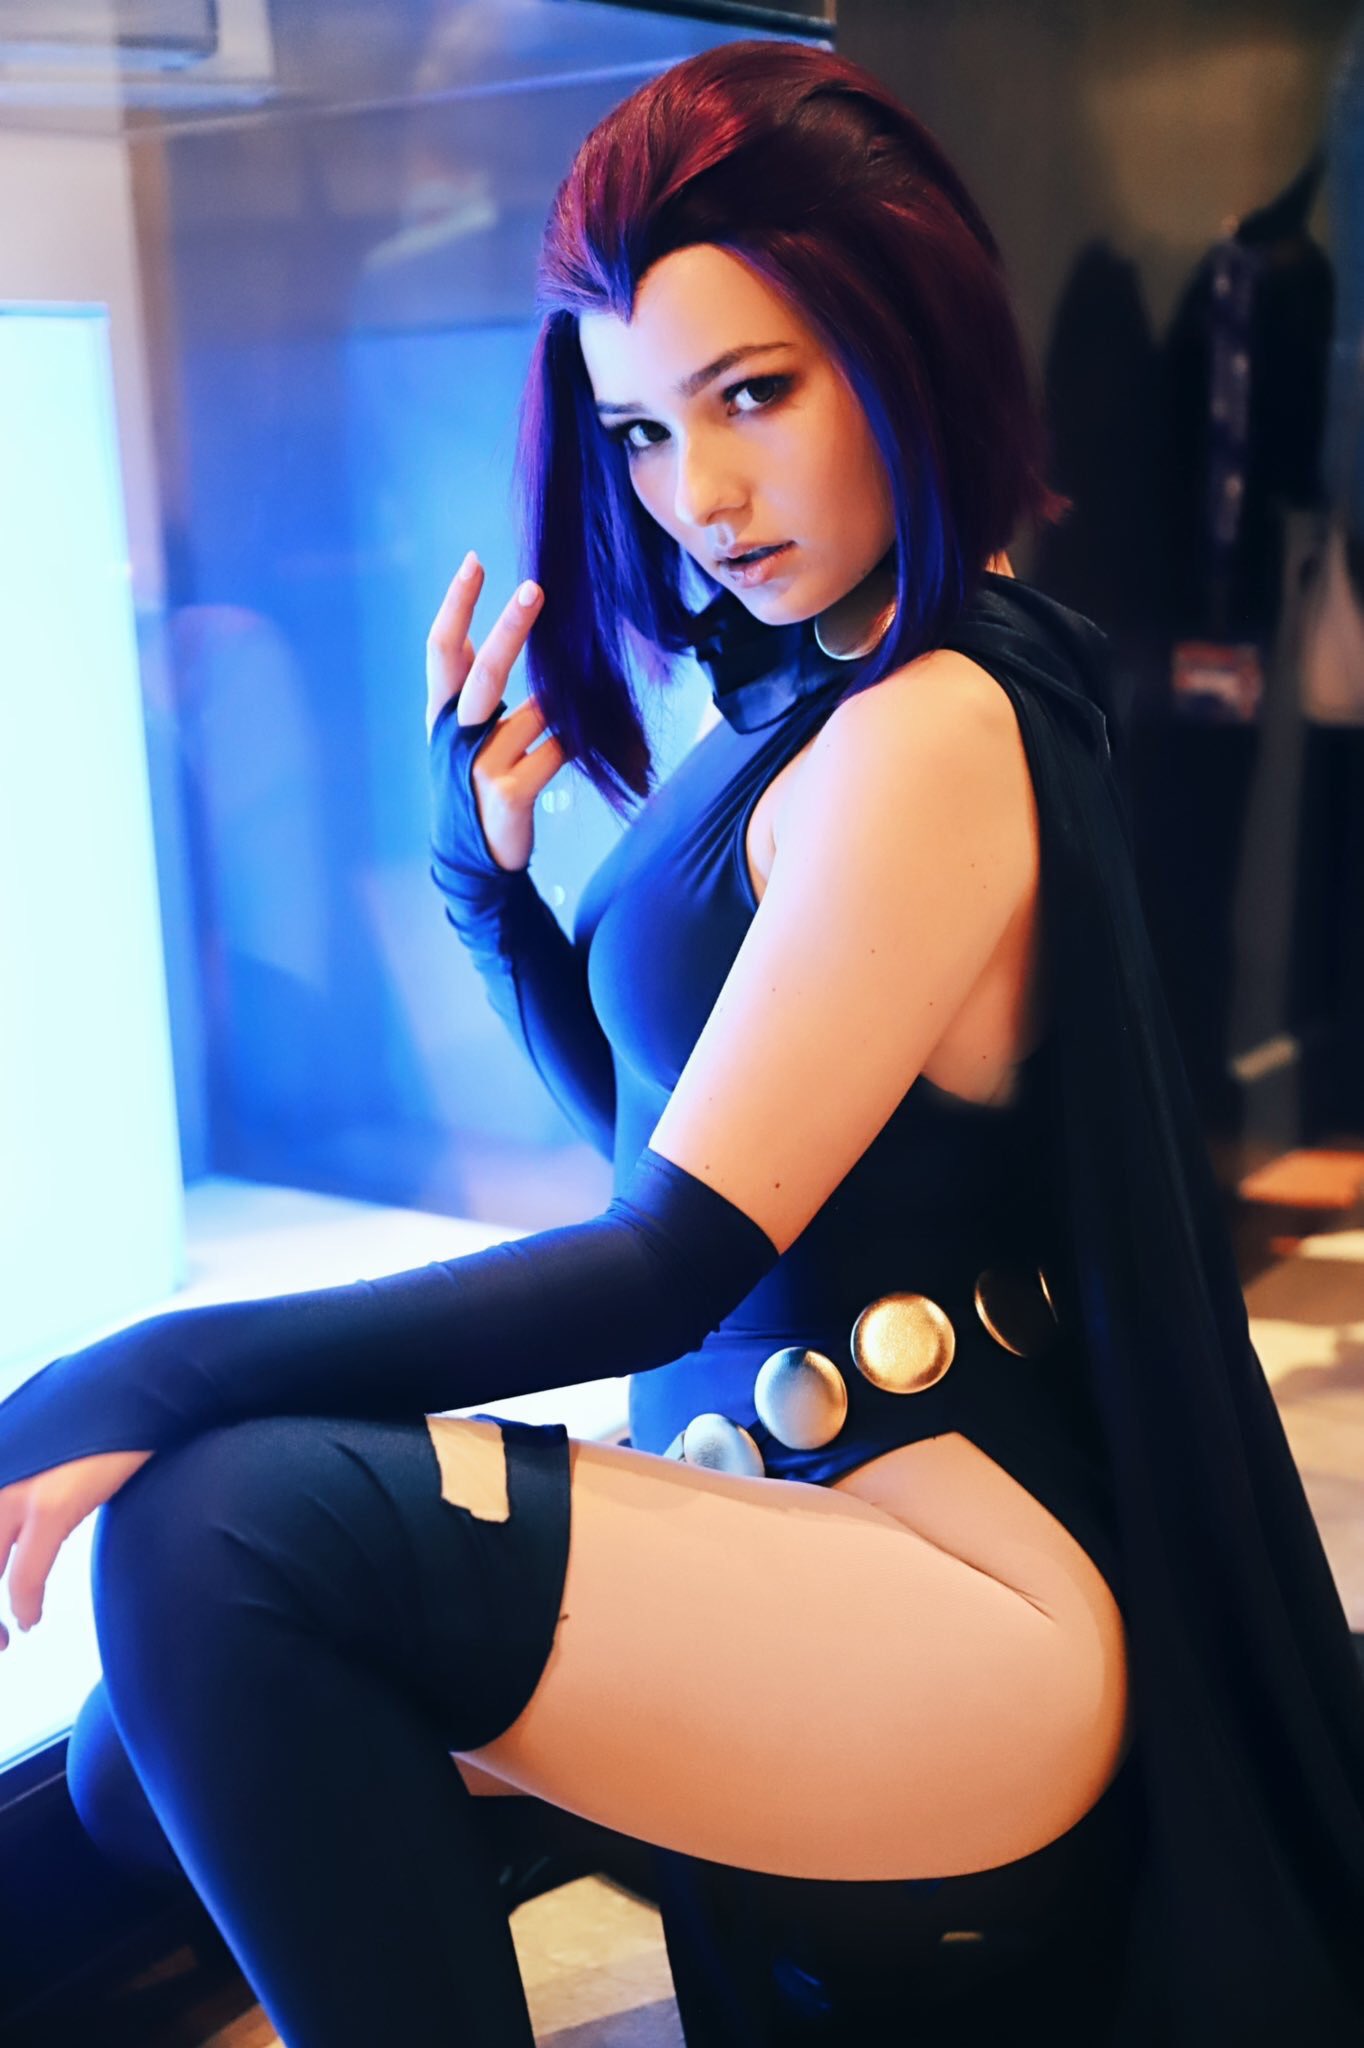 “A seriously beautiful #raven #cosplay by the super talented @theomgcosplay...